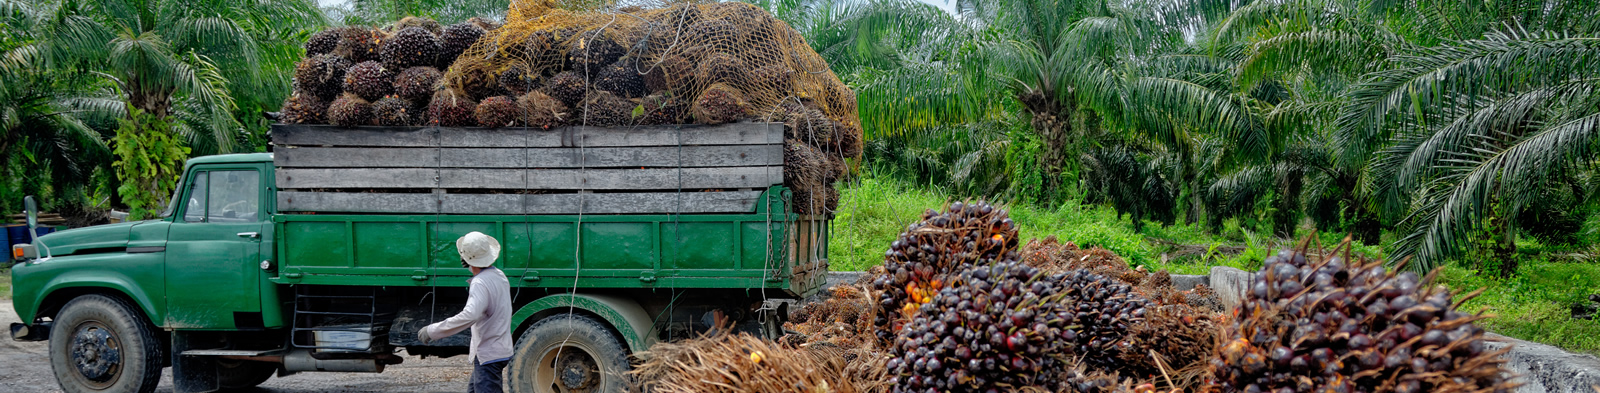 Palm Oil being harvested